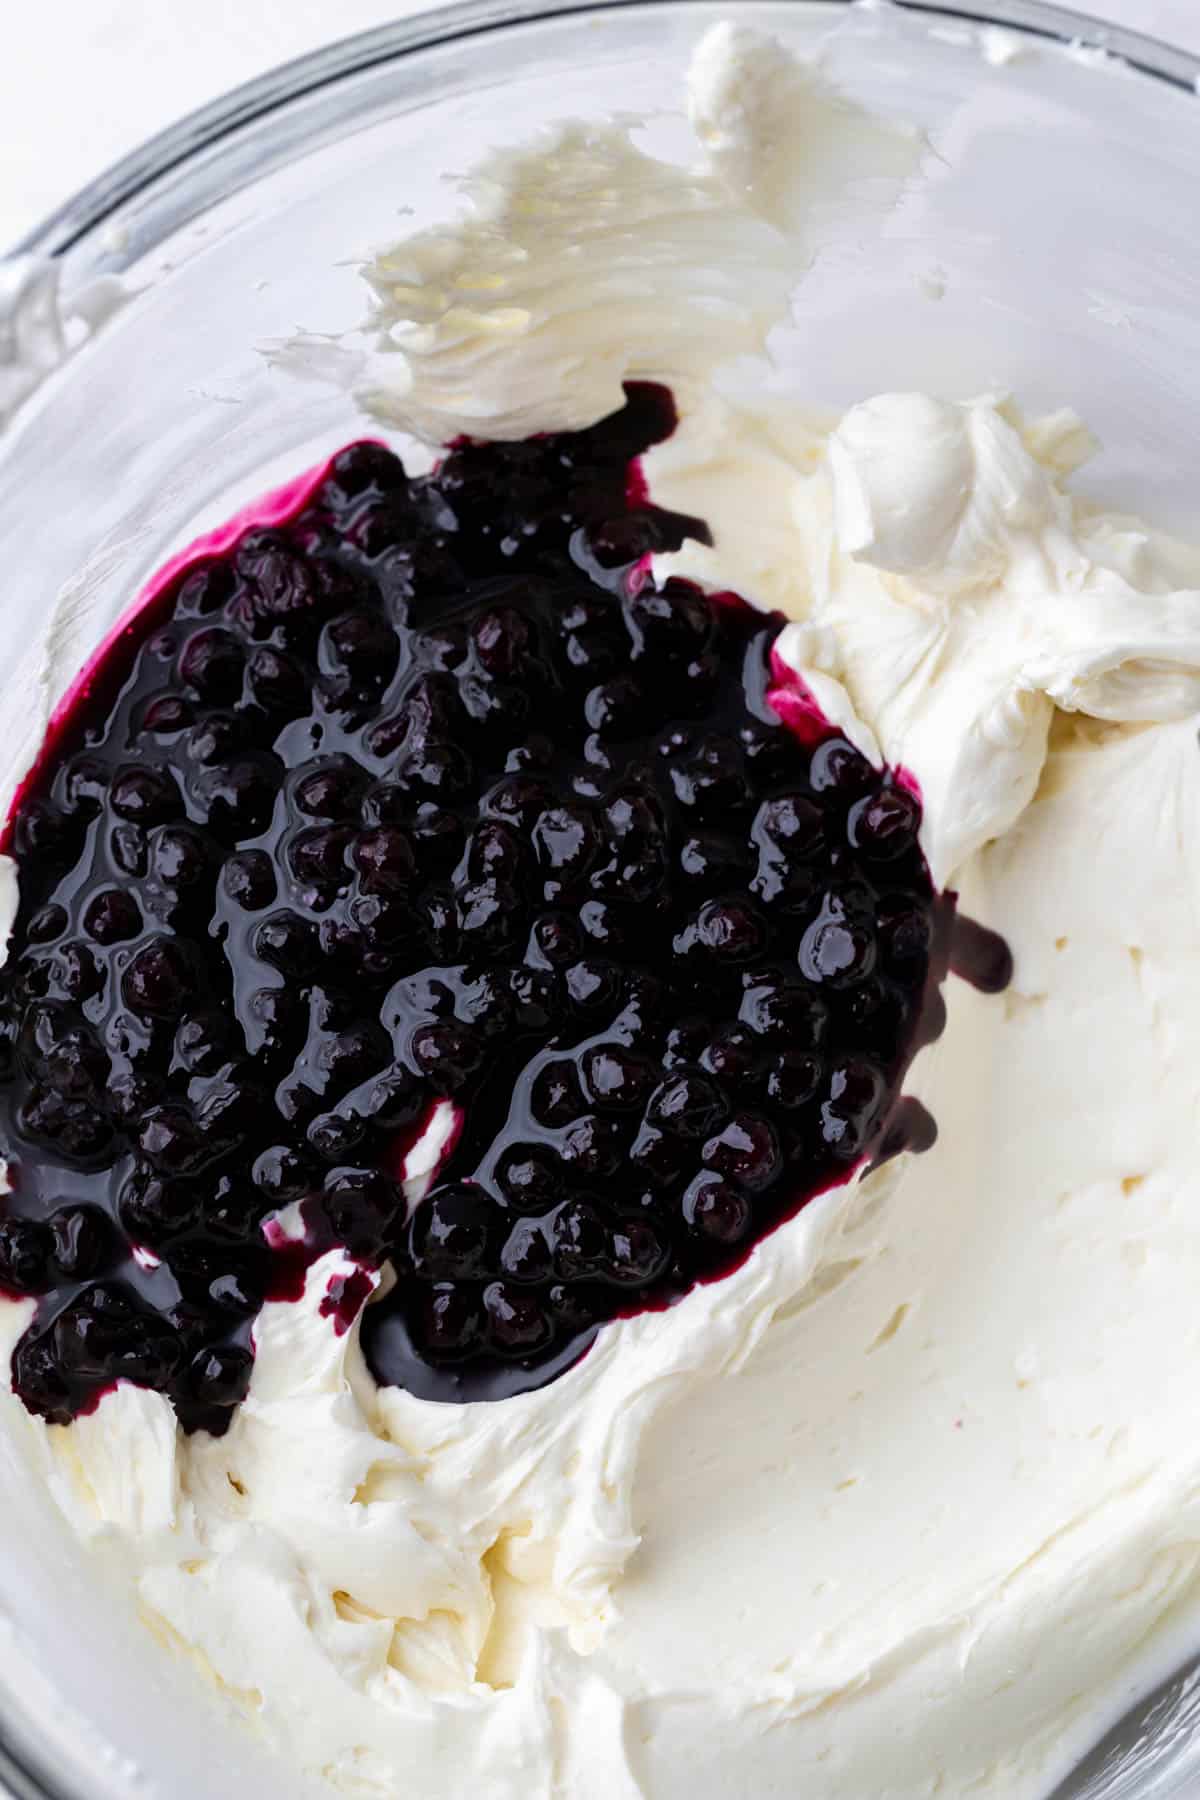 Blueberry sauce on top of cheesecake batter.